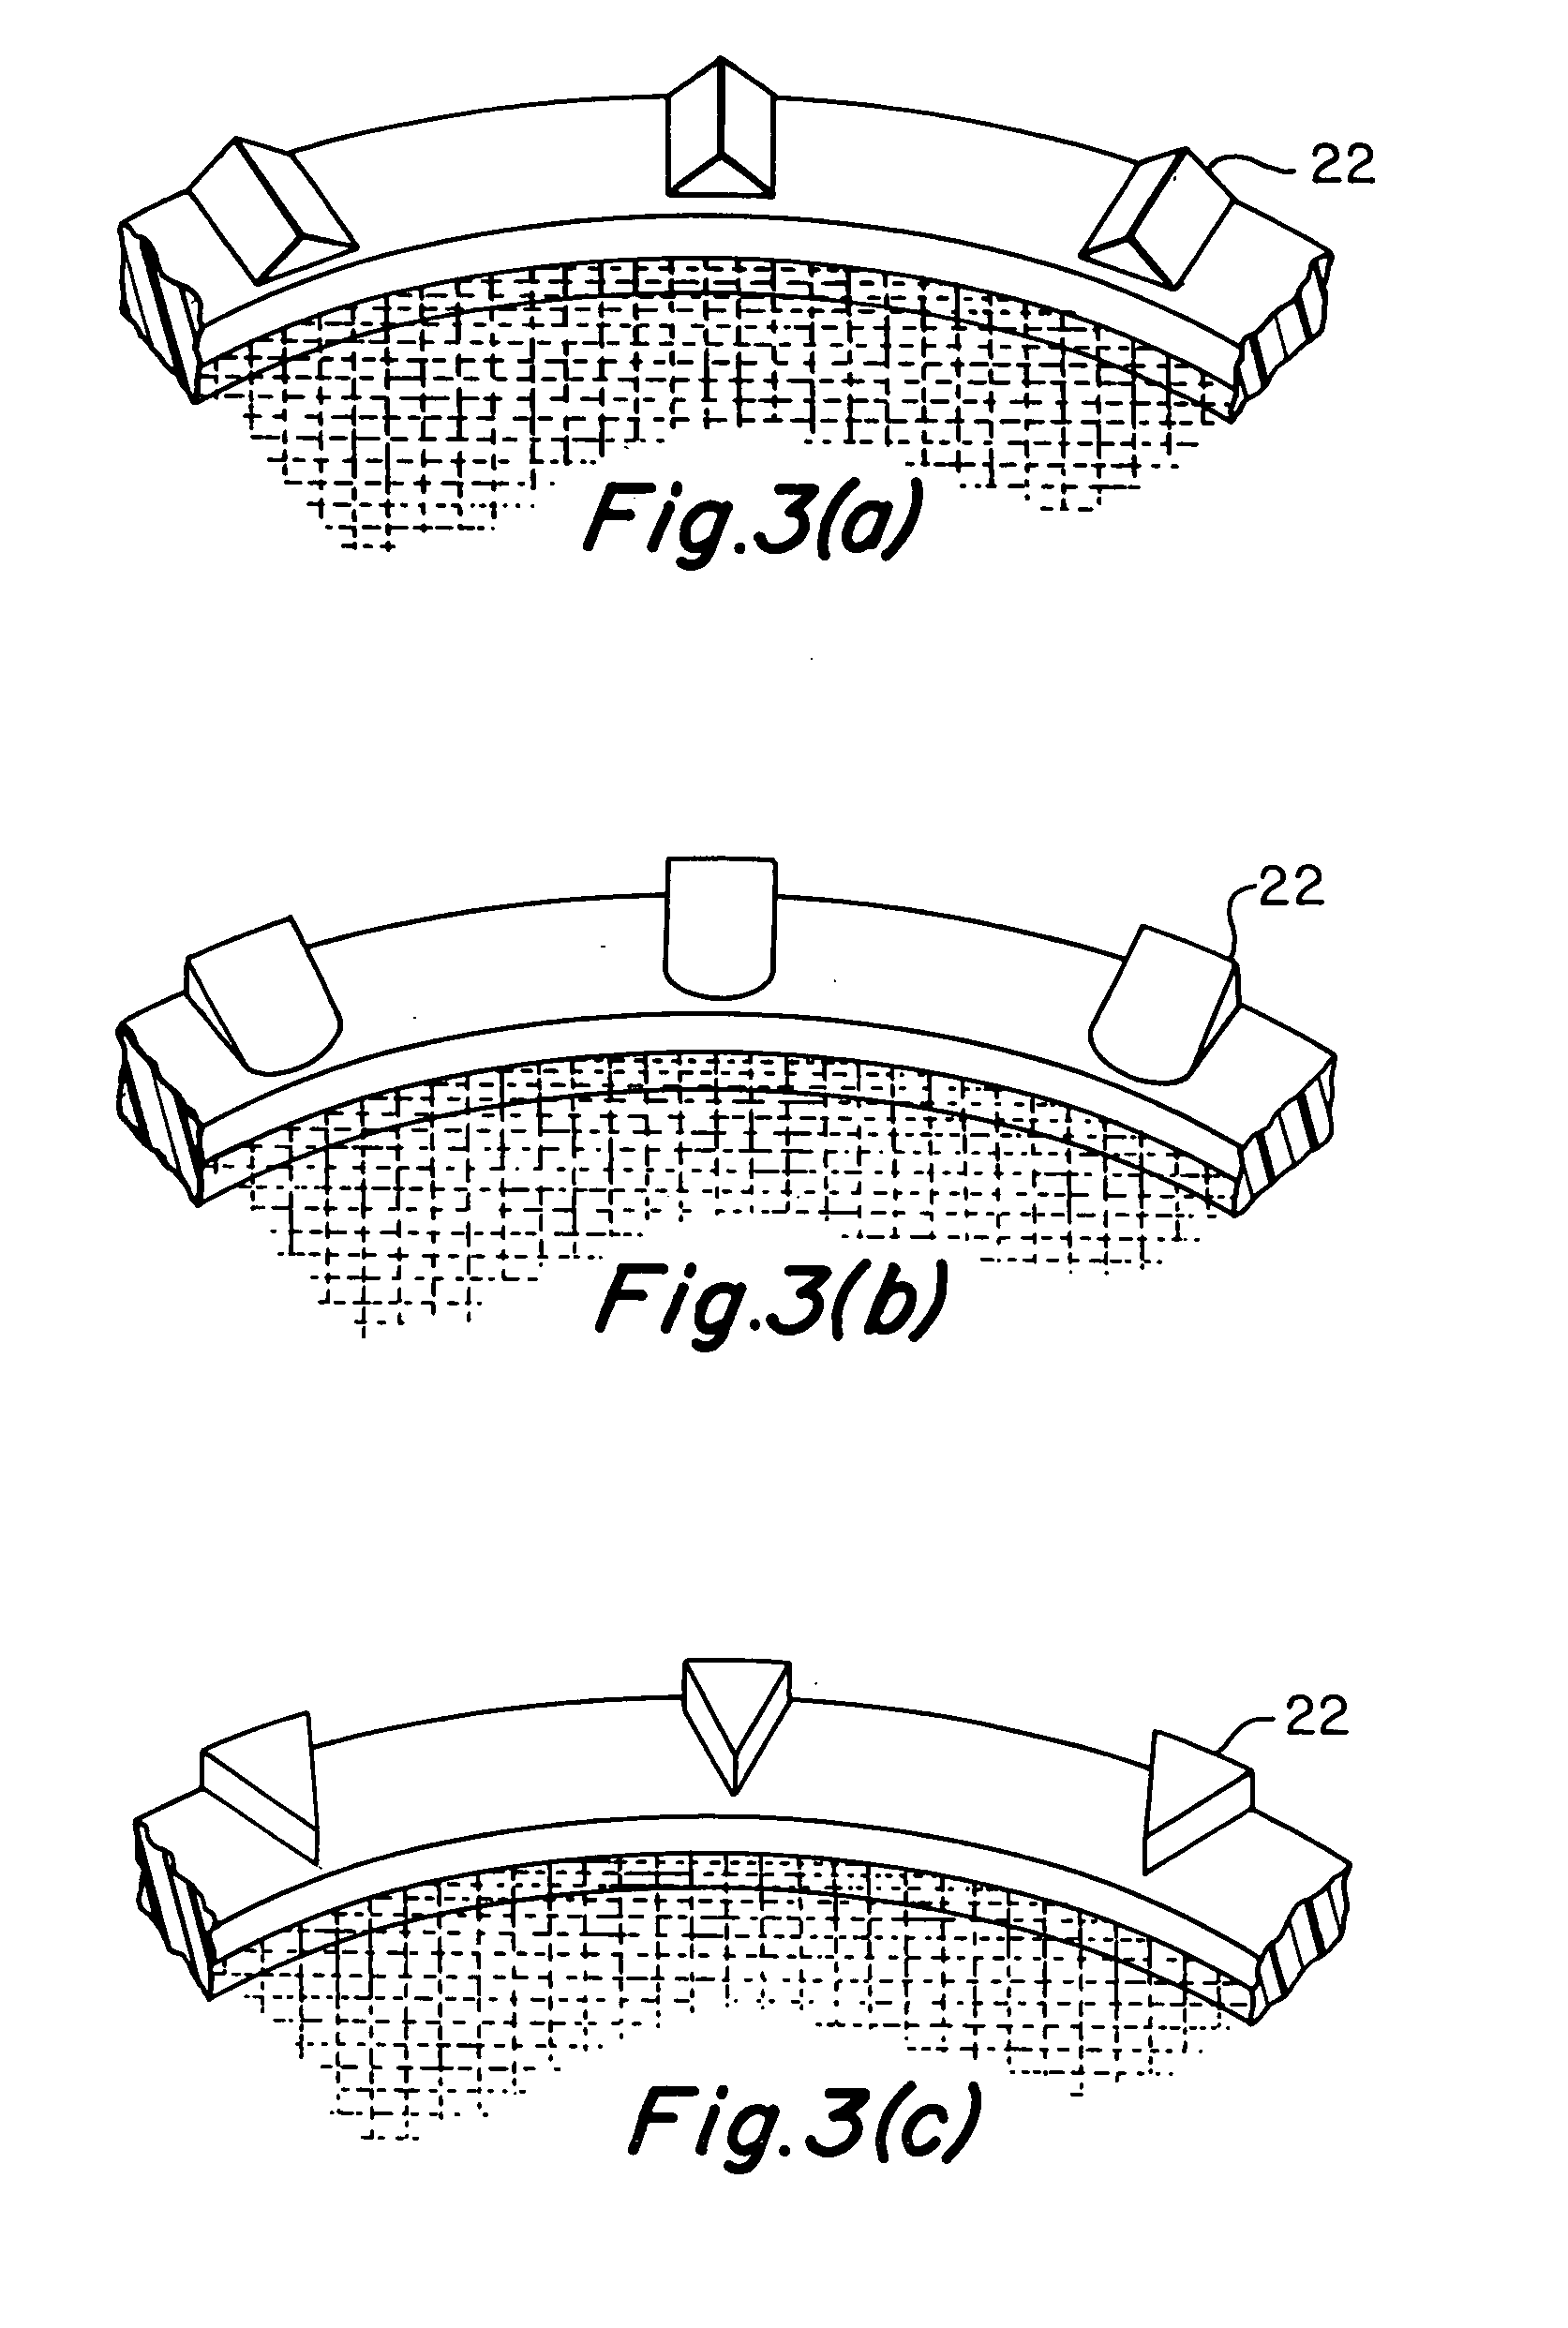 Implantable prosthesis and method and apparatus for loading and delivering an implantable prosthesis